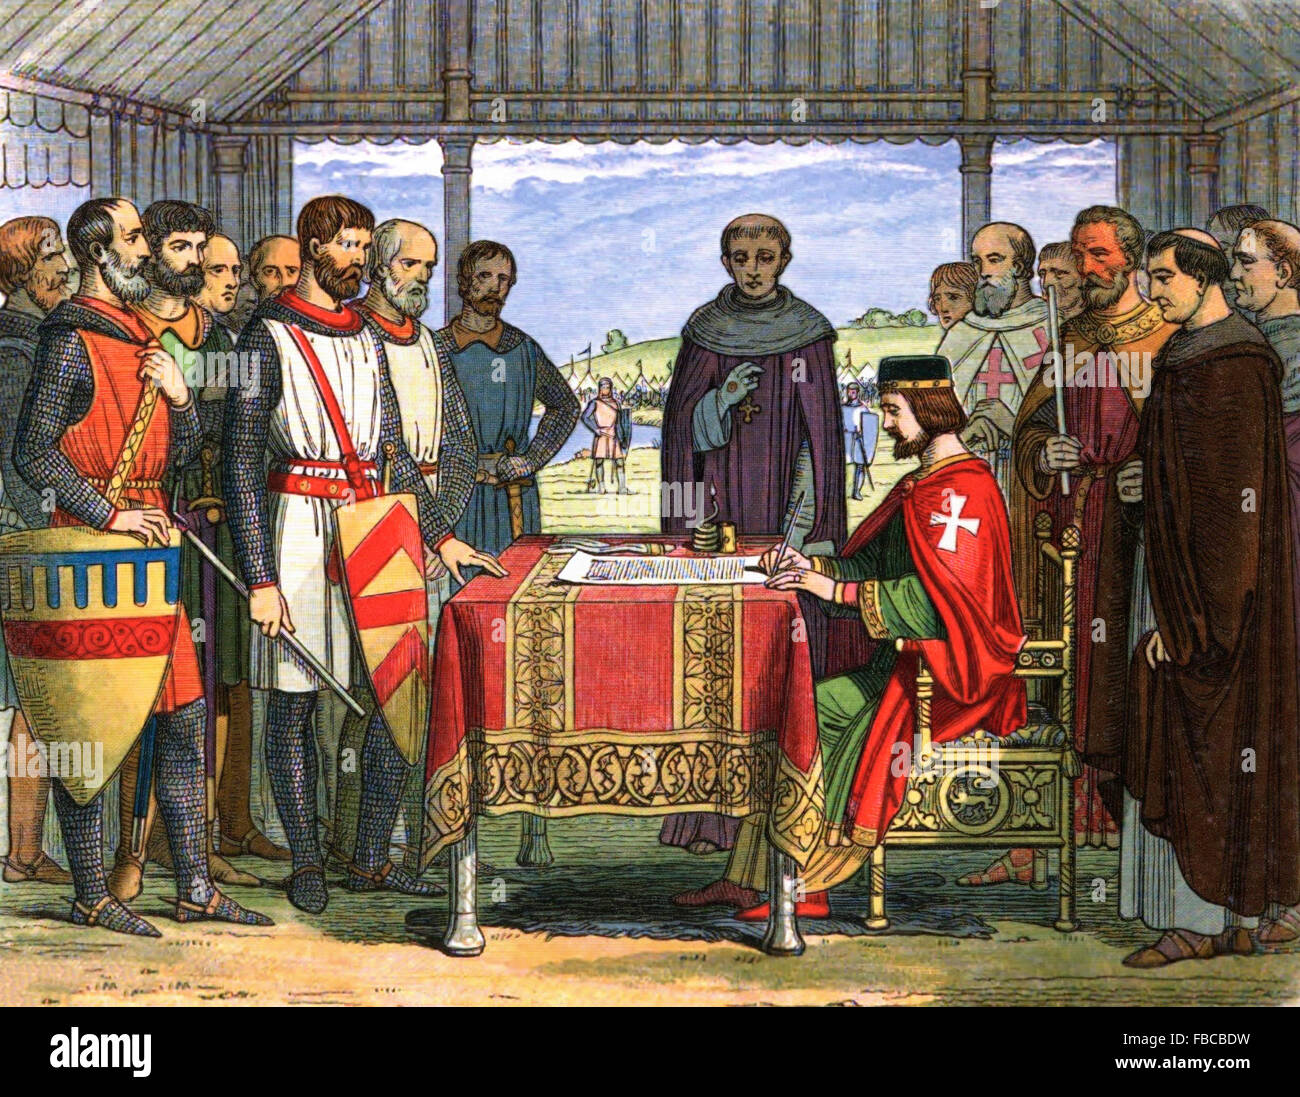 Magna Carta. A 19thC depiction of King John signing the Magna Carta (The Great Charter) at Runnymede in 1215 Stock Photo